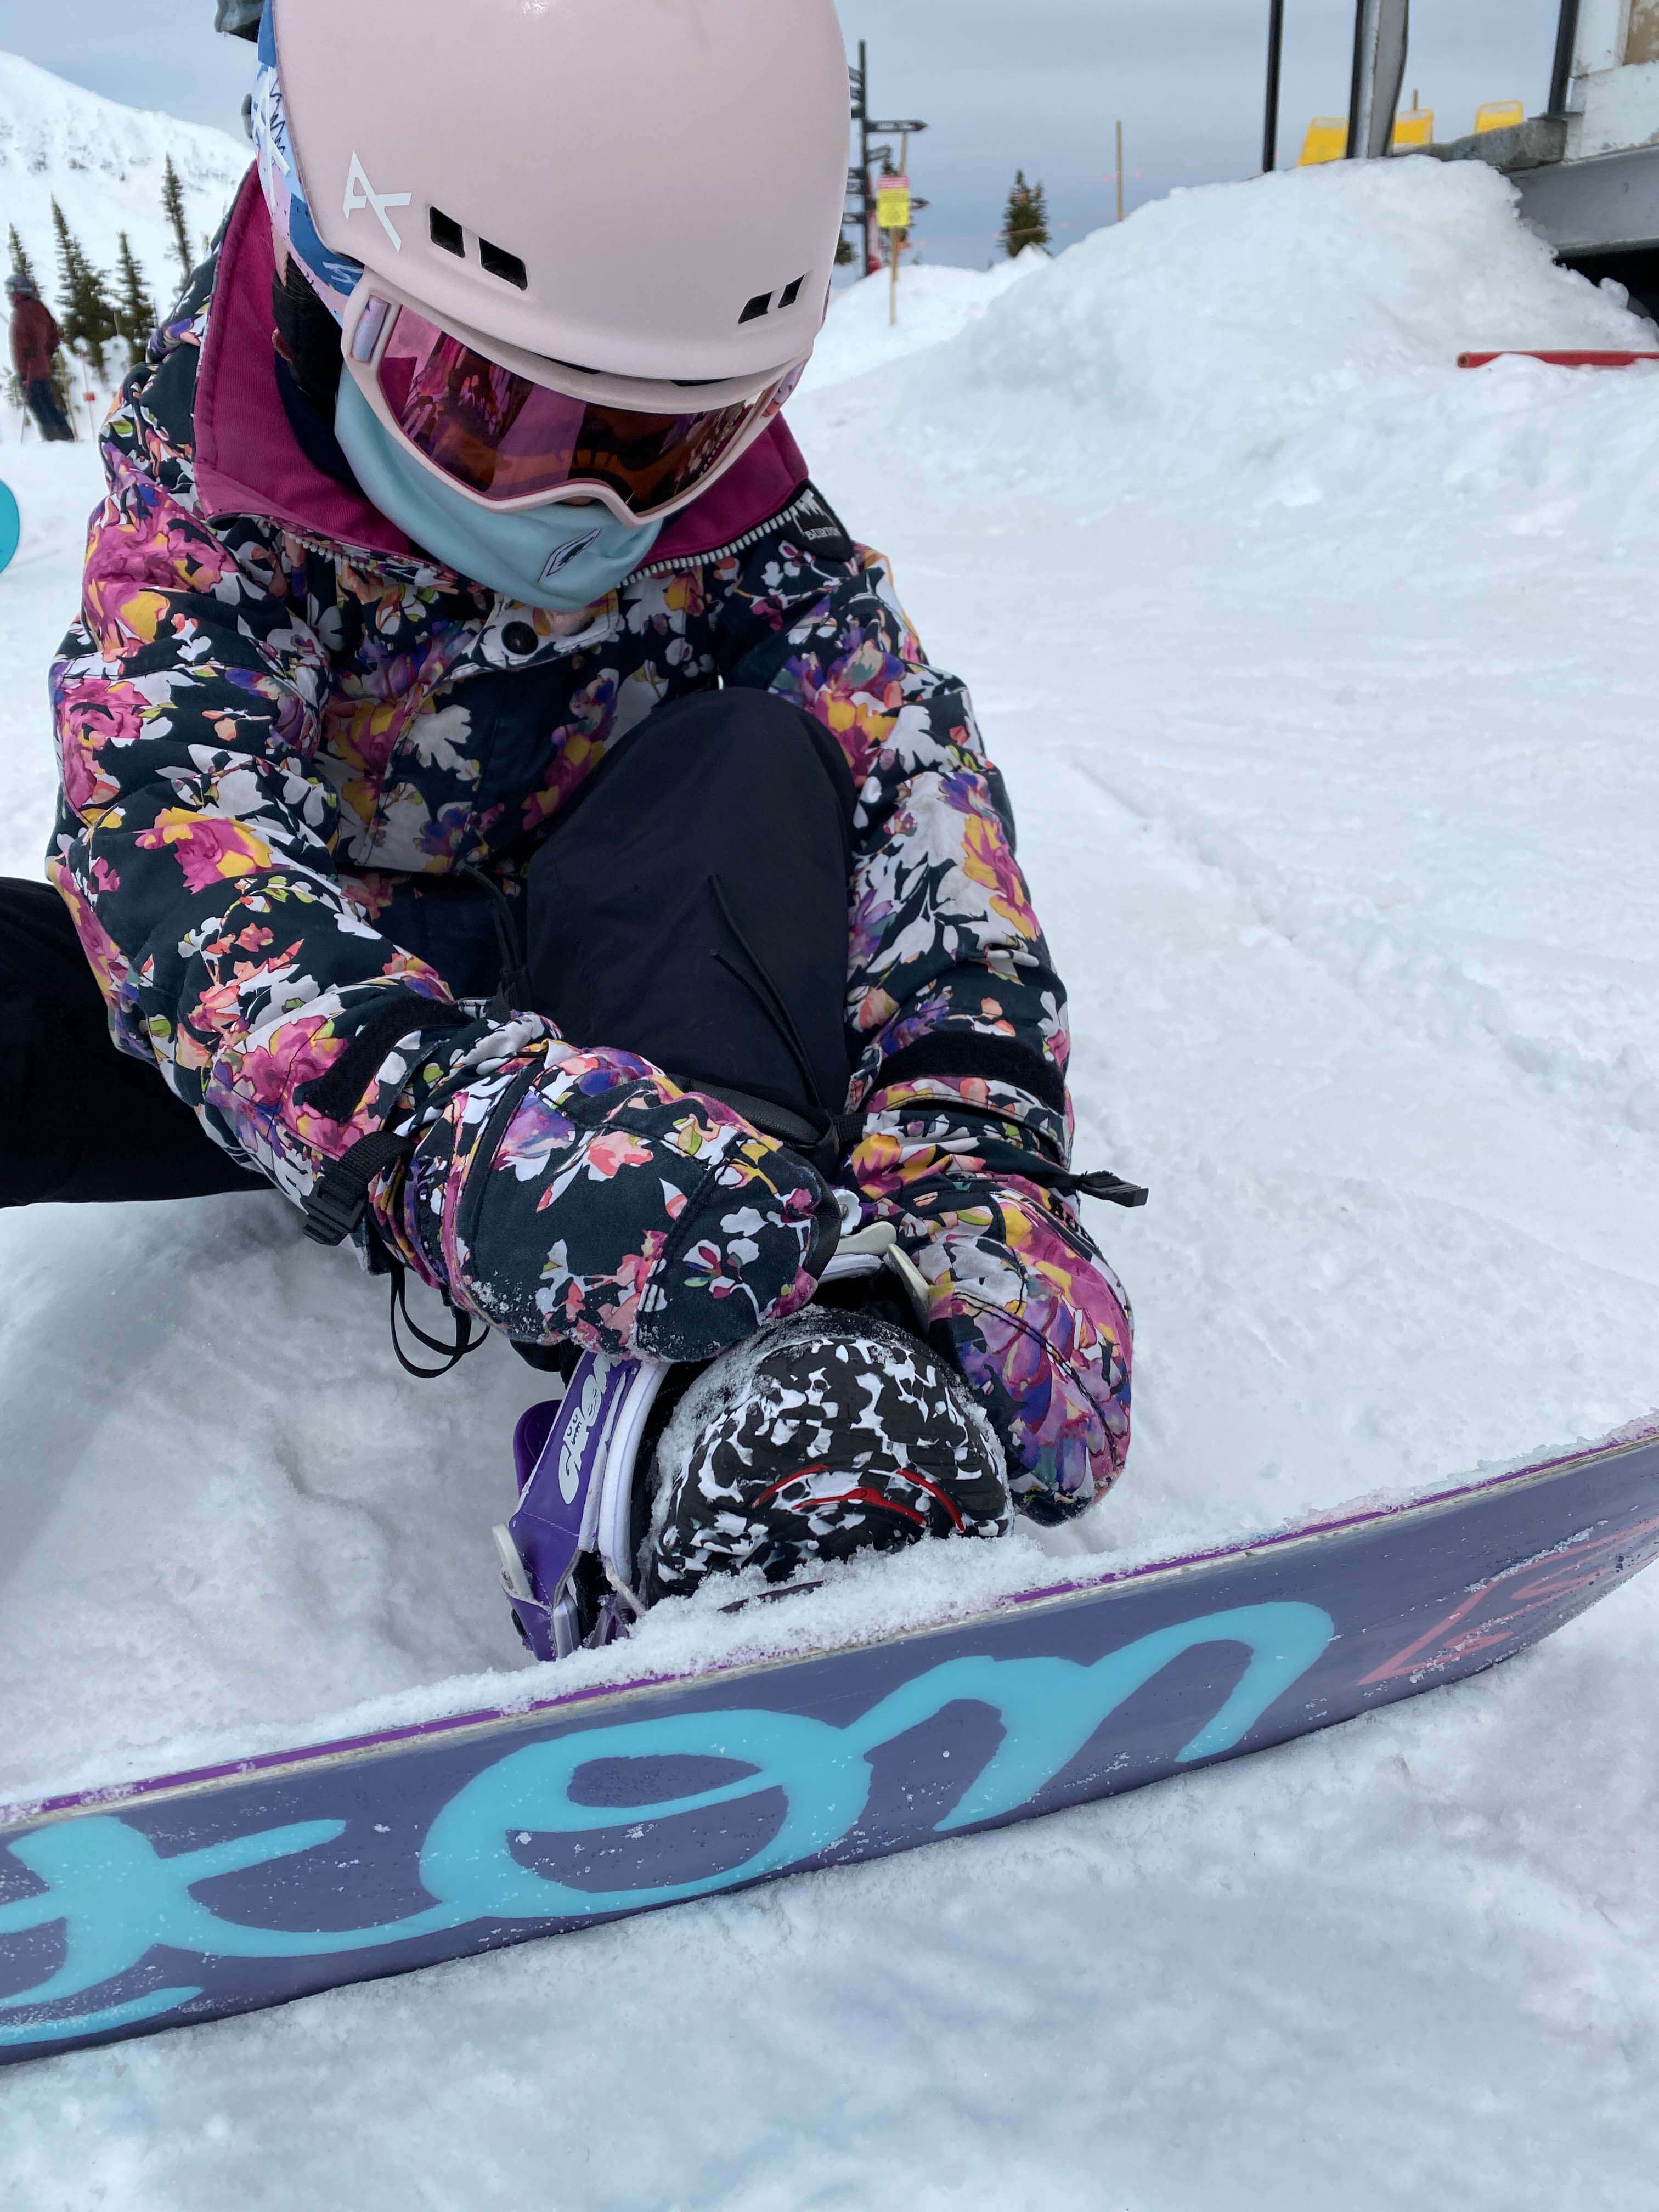 Child with gloves adjusting snowboard bindings